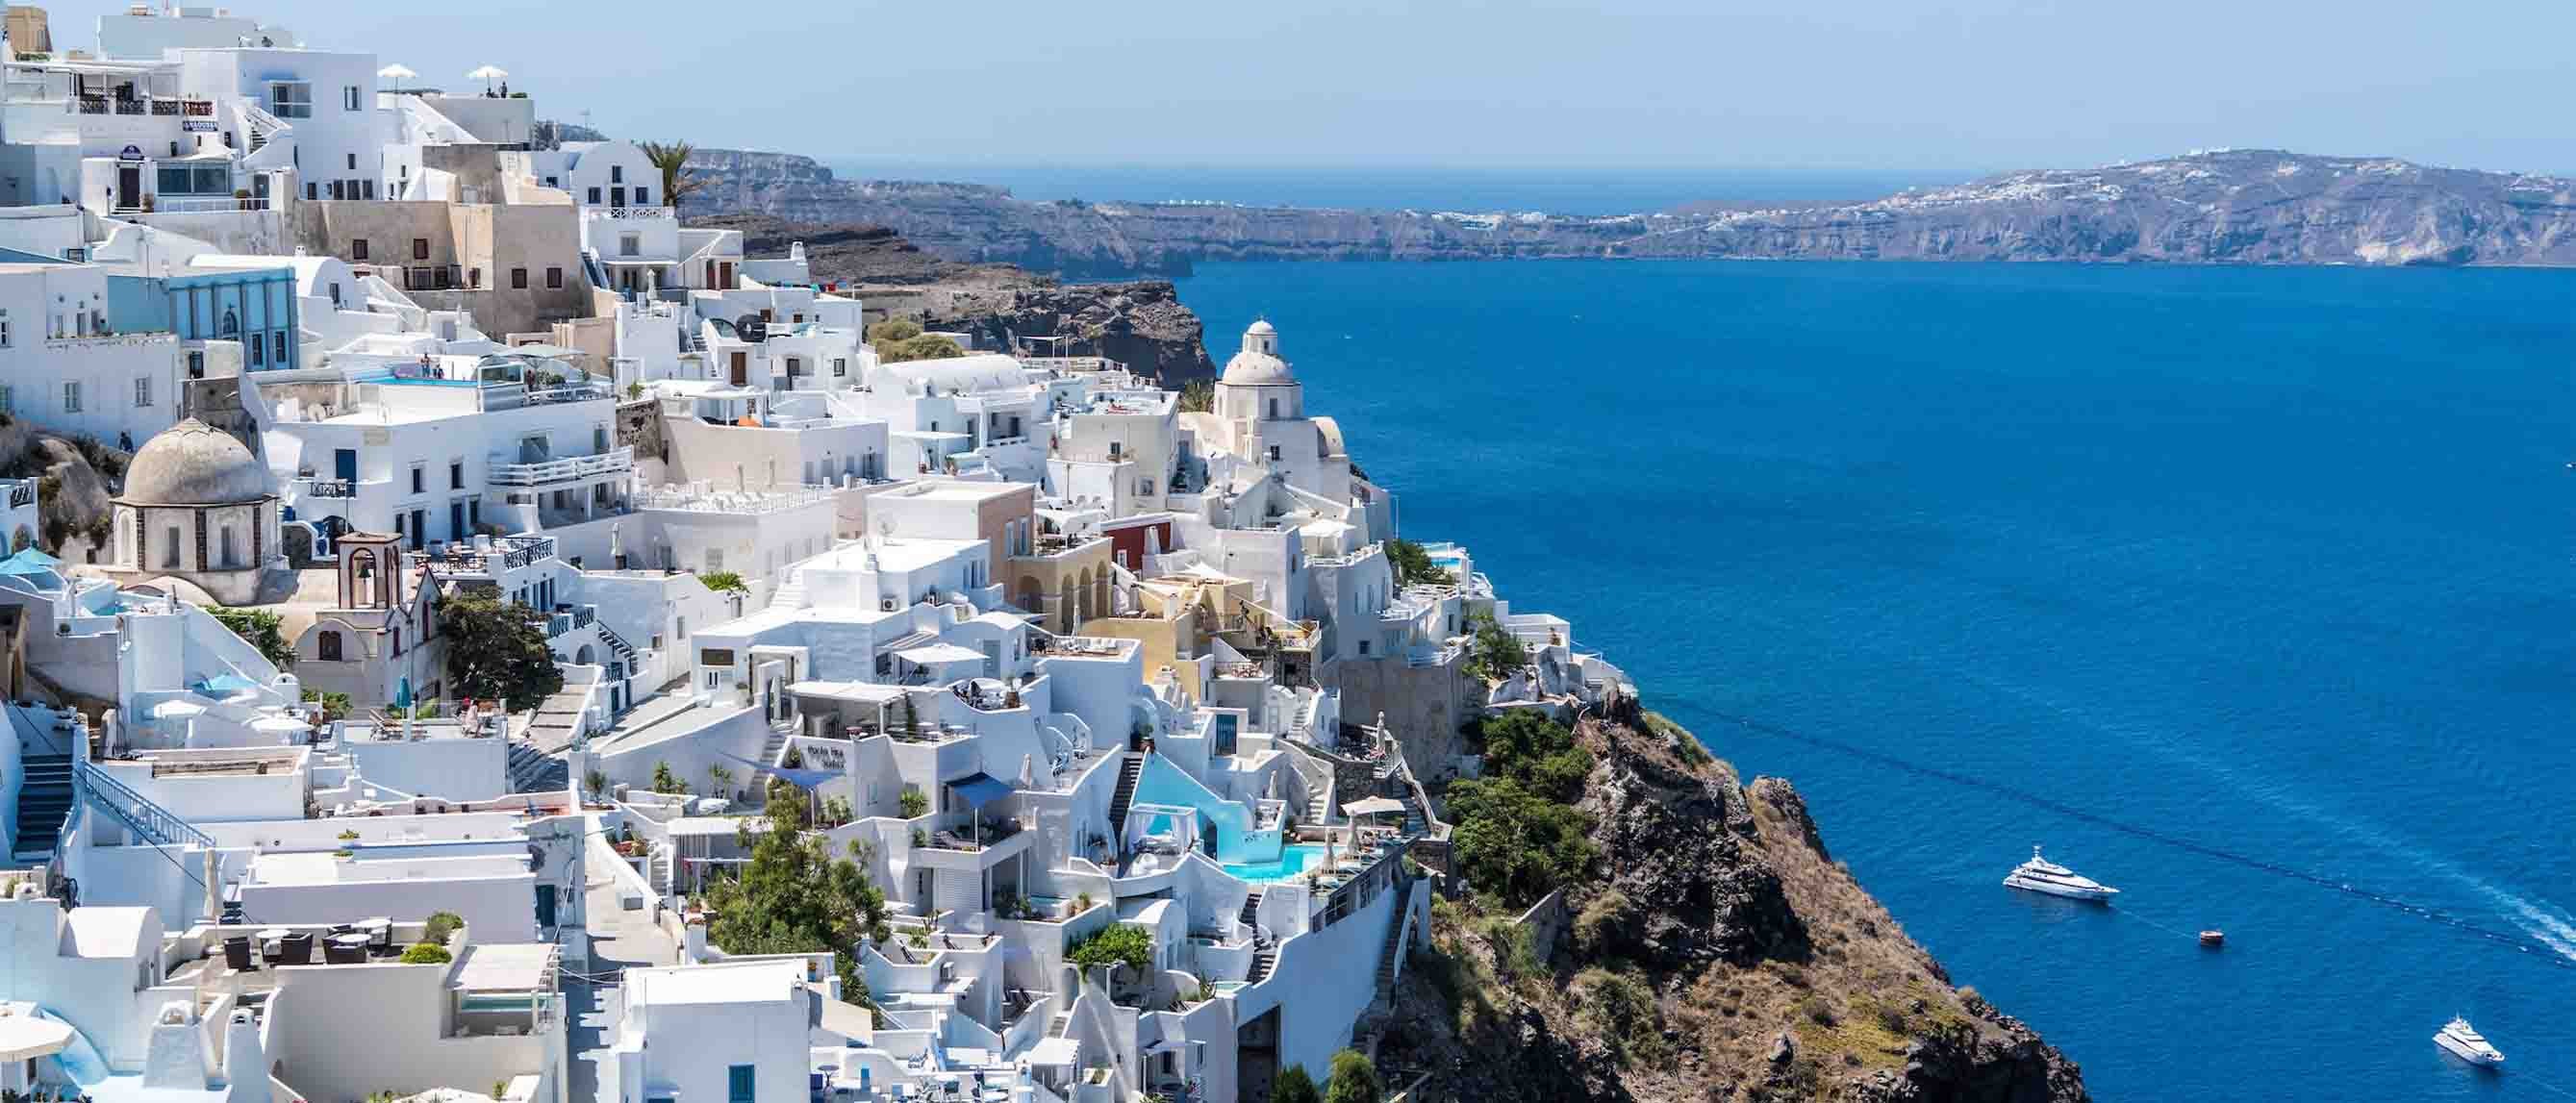 Best Greek islands for couples